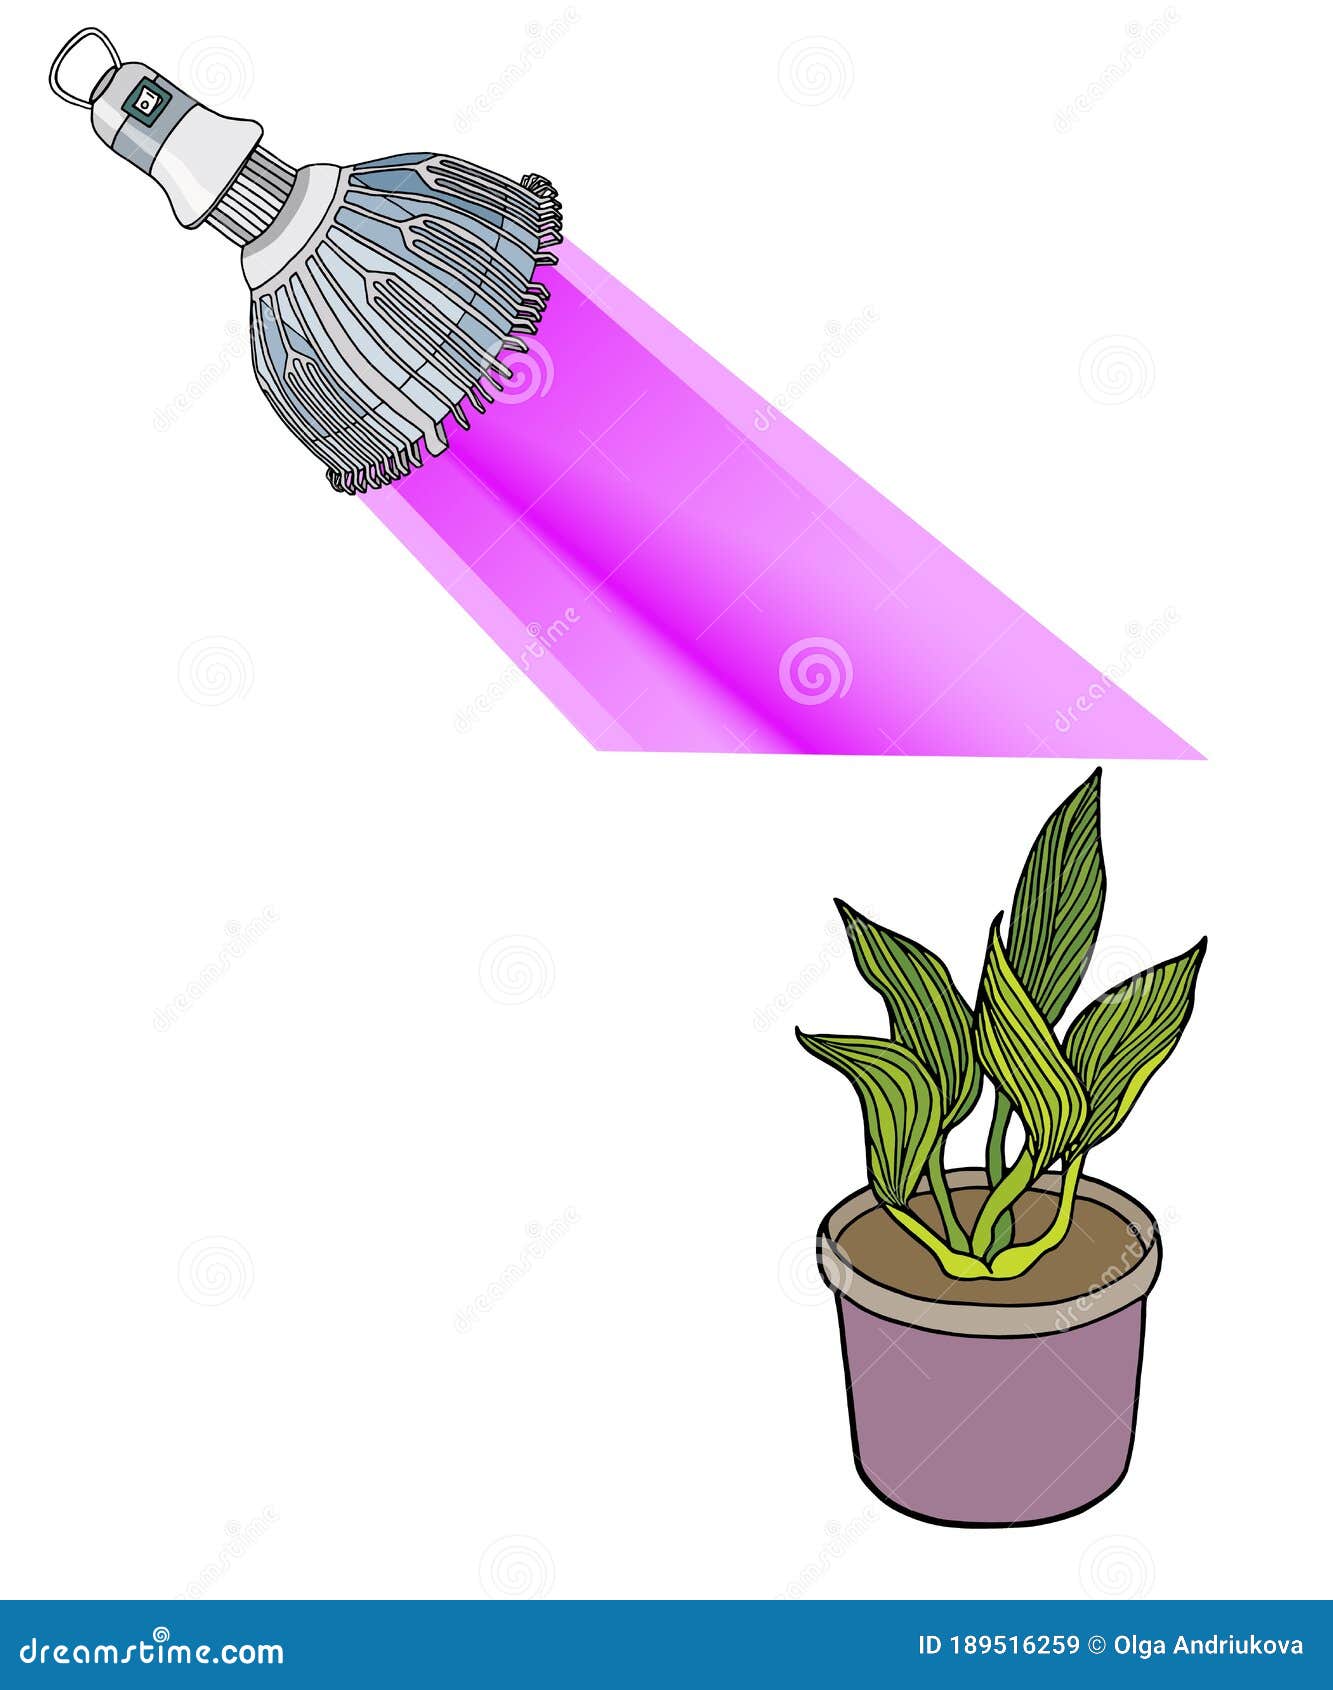 Phyto Lamp Bulb With Spectrum Light And Plant In Flower Pot Red And Blue Led Lights For Growing Plants Scheme Of Stock Vector Illustration Of Isolated Icon 189516259